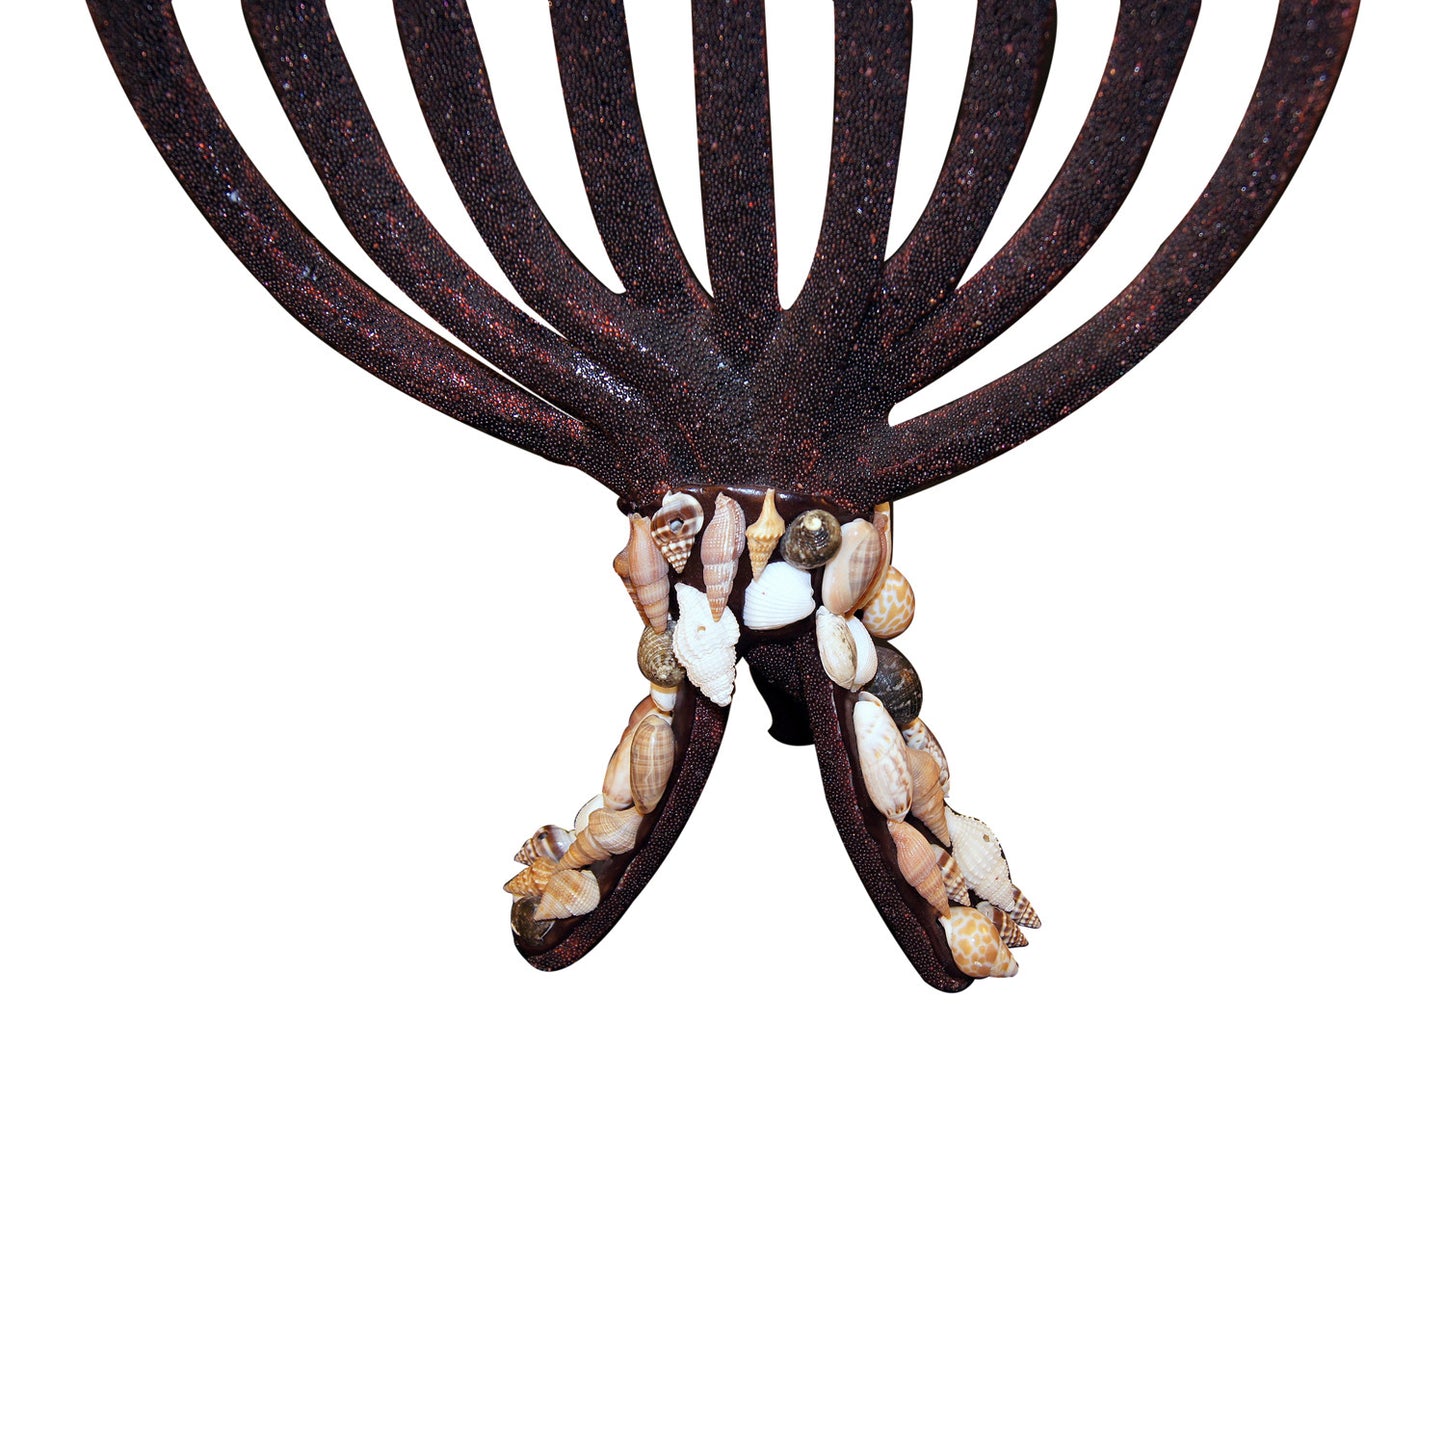 GiftBay 6046 Menorah 9-Branch Beautifully Hand Crafted with Sea Shells and Thousands of Dark Brown Beads on Metal 11" H